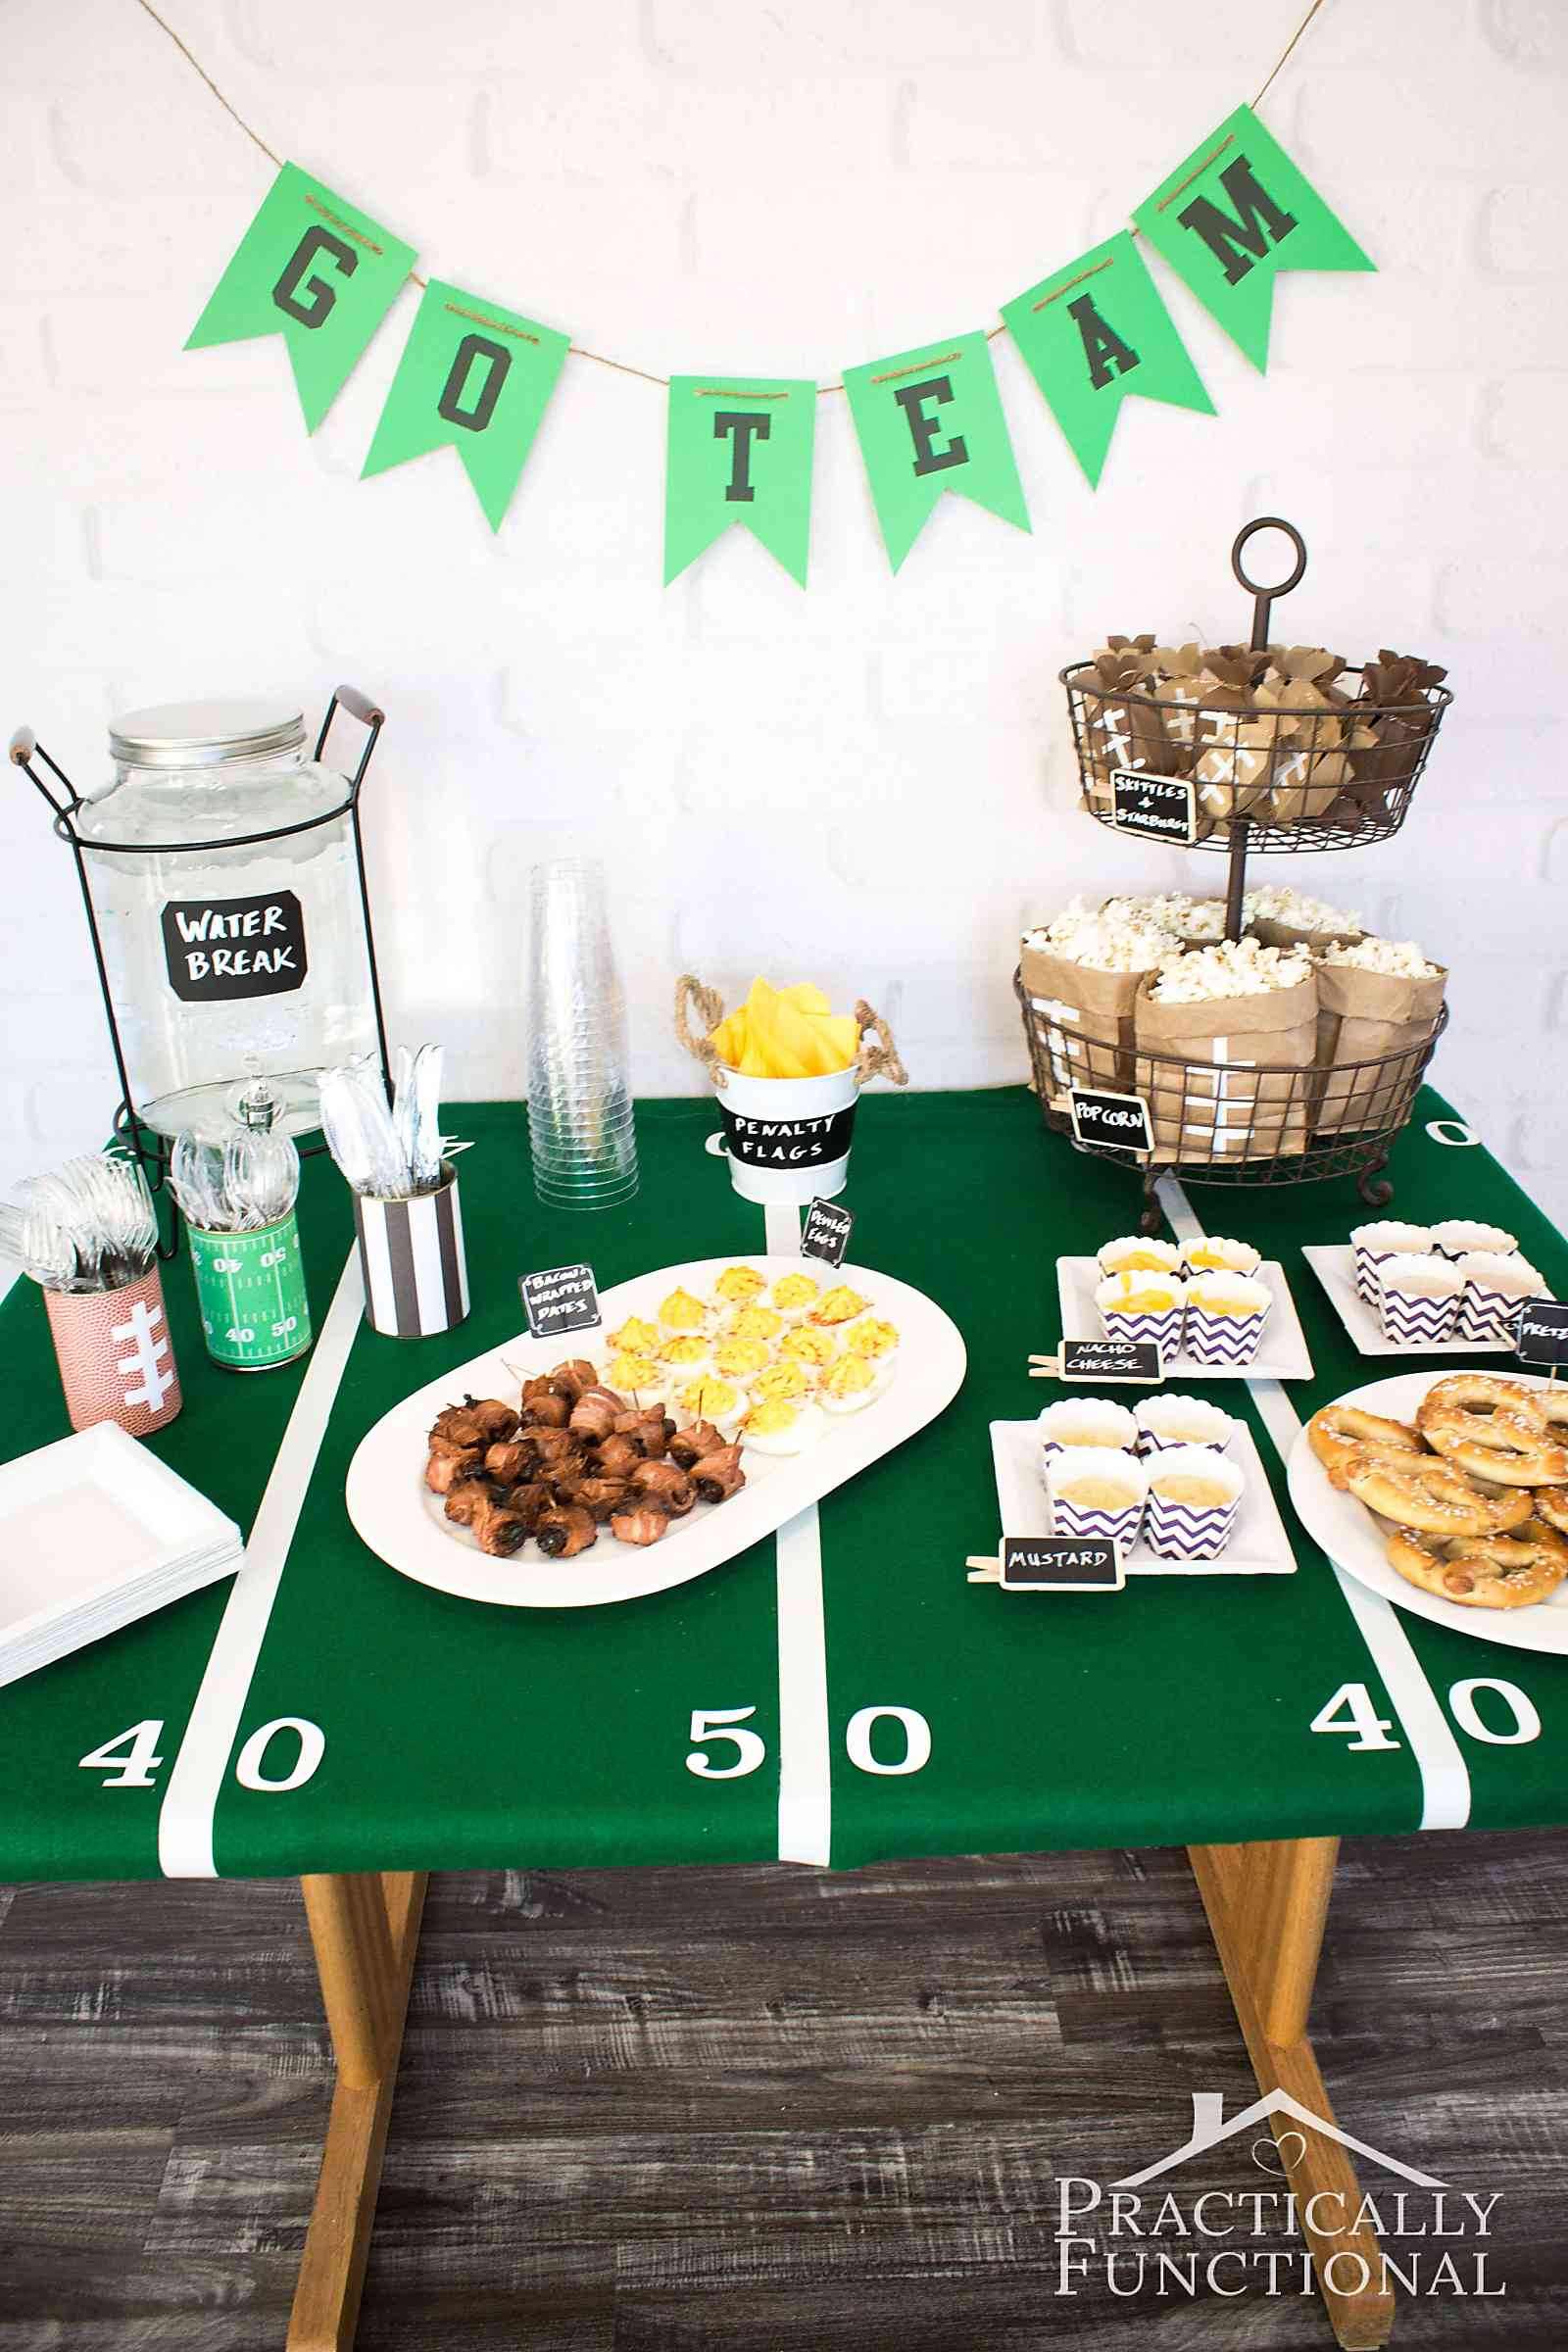 Add a fun customizable message to your football party with this free printable football banner! Includes letters A-Z and numbers 0-9!